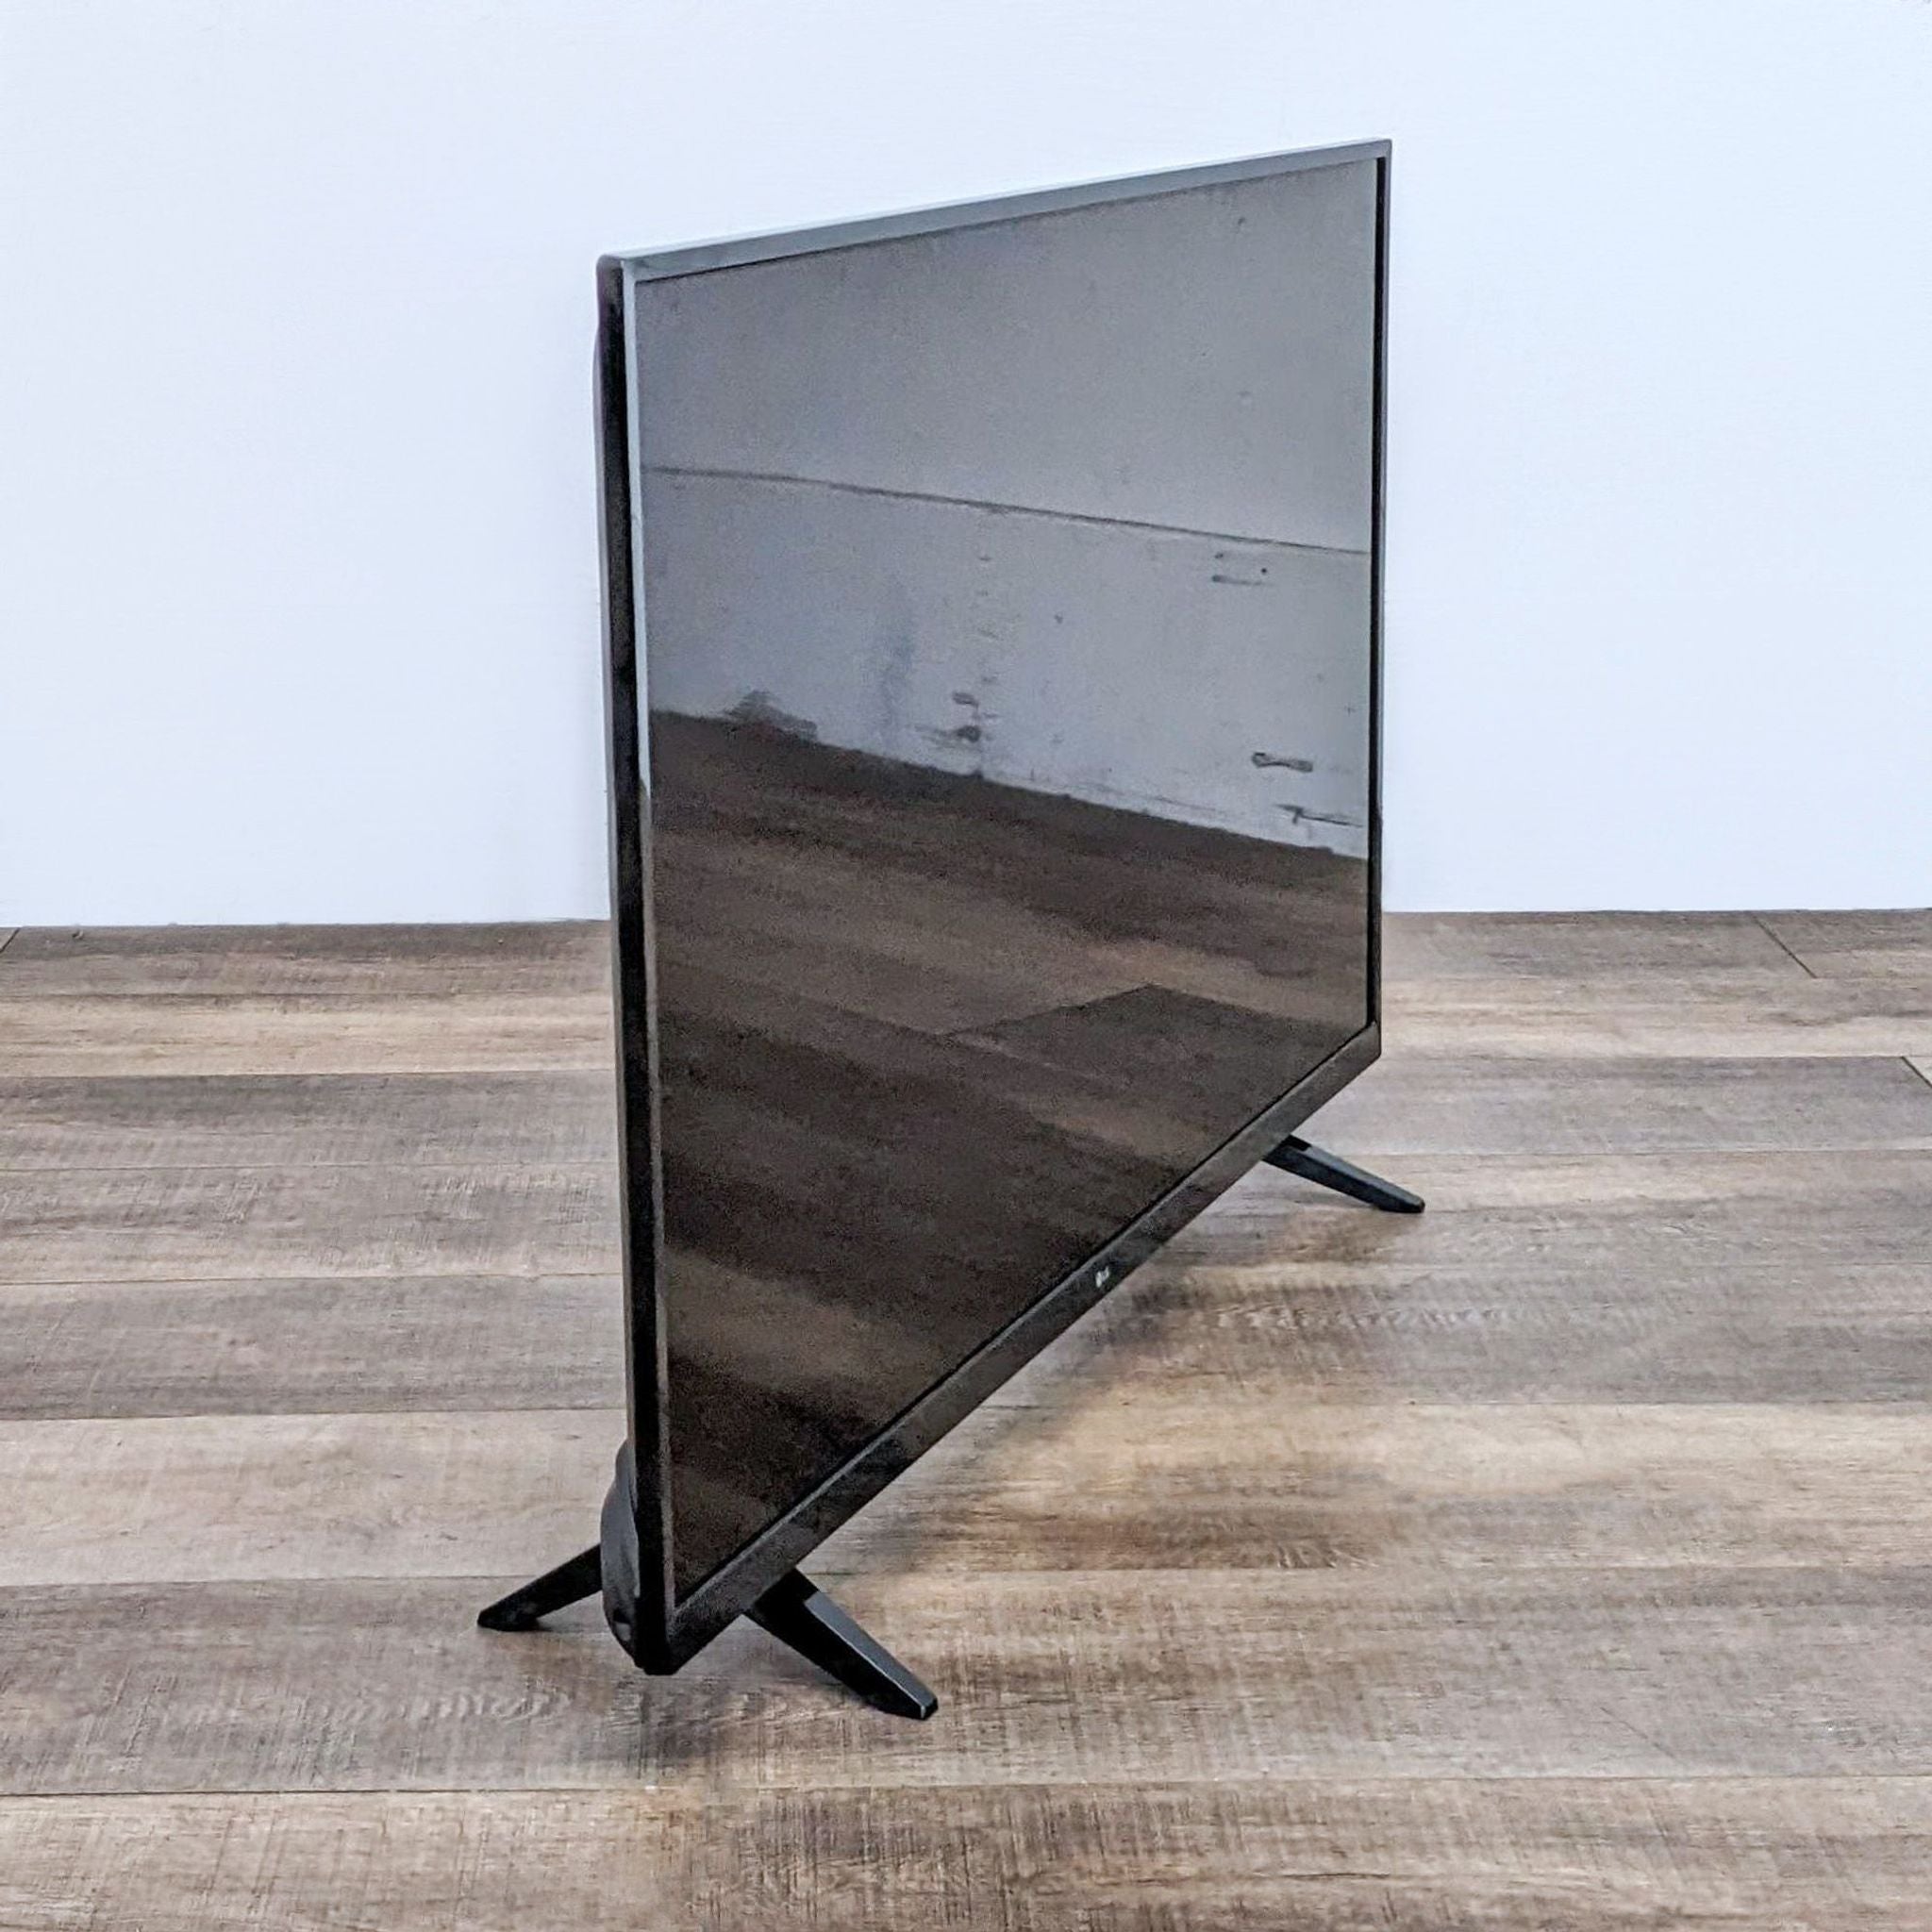 An LG TV on a stand displaying a clear reflective screen on a wooden floor against a white wall.